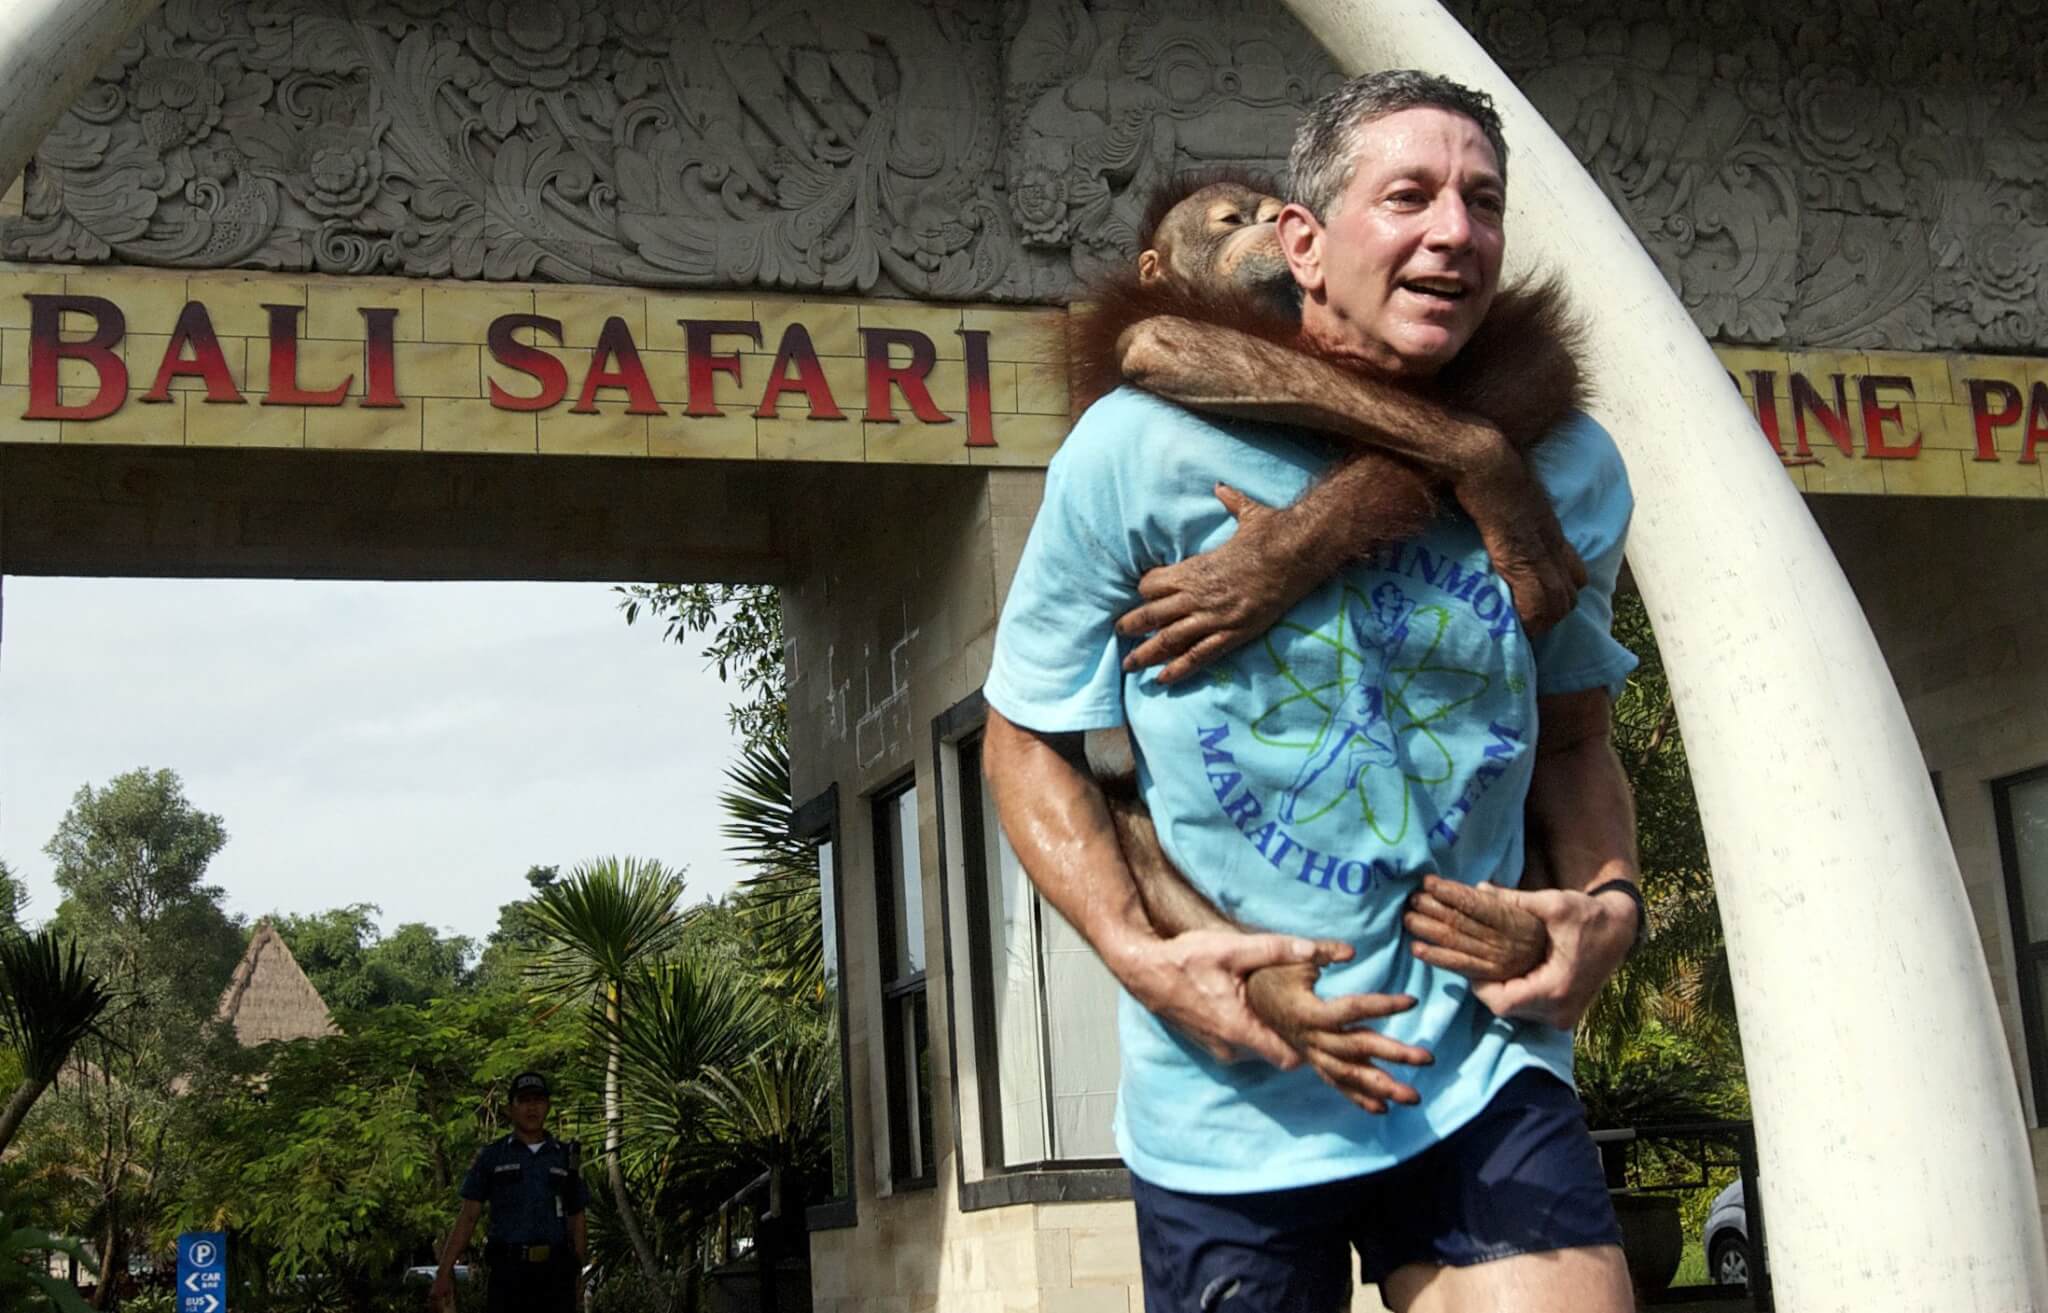 Us Record-breaker Ashrita Furman Skipping with Orang Utan As He Celebrate After Broke His Record on Skipping 5 Kilometers Without Rope in 29 Minutes 59 Seconds at Bali Safari Zoo in Bali Indonesia on 06 February 2011 Furman Broke His Record After Skipping 5 Kilometers Without Rope in 29 Minutes 59 Seconds Furman Holds Currently 125 Guinness World Records Including the Record For the Most Records Indonesia Gianyar